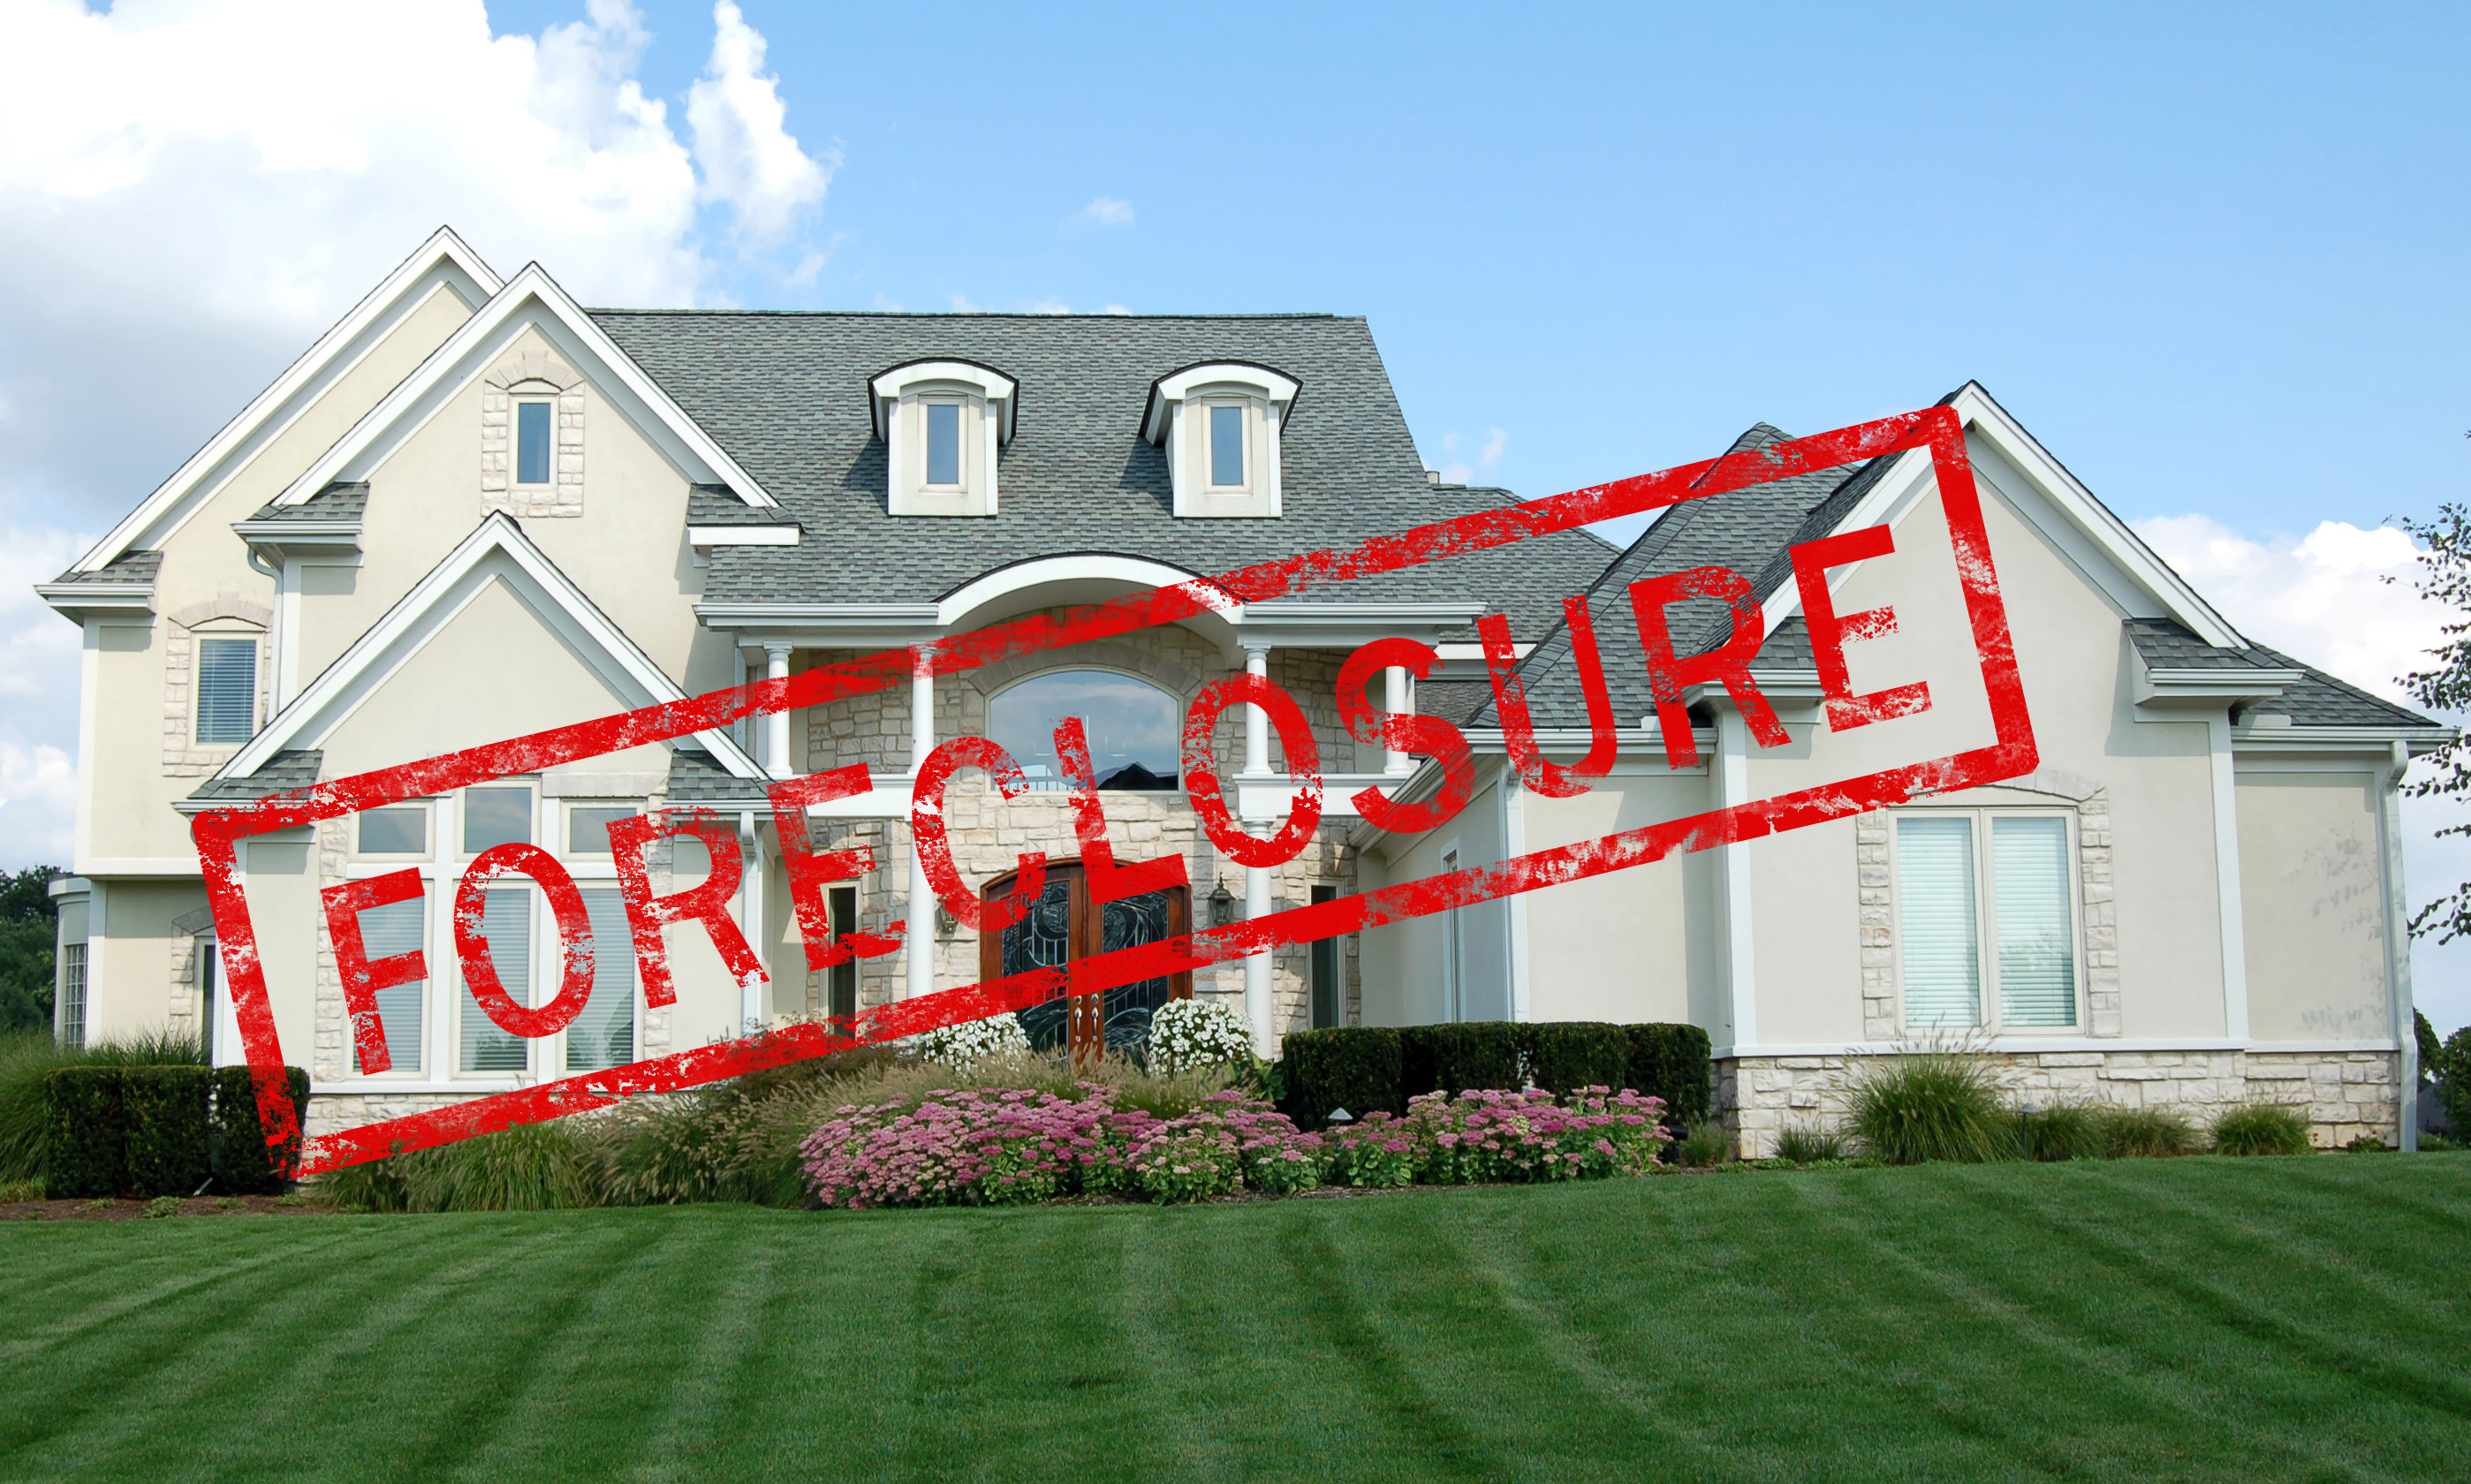 Call CAA Real Property Services, Inc. to discuss appraisals regarding Greenville foreclosures